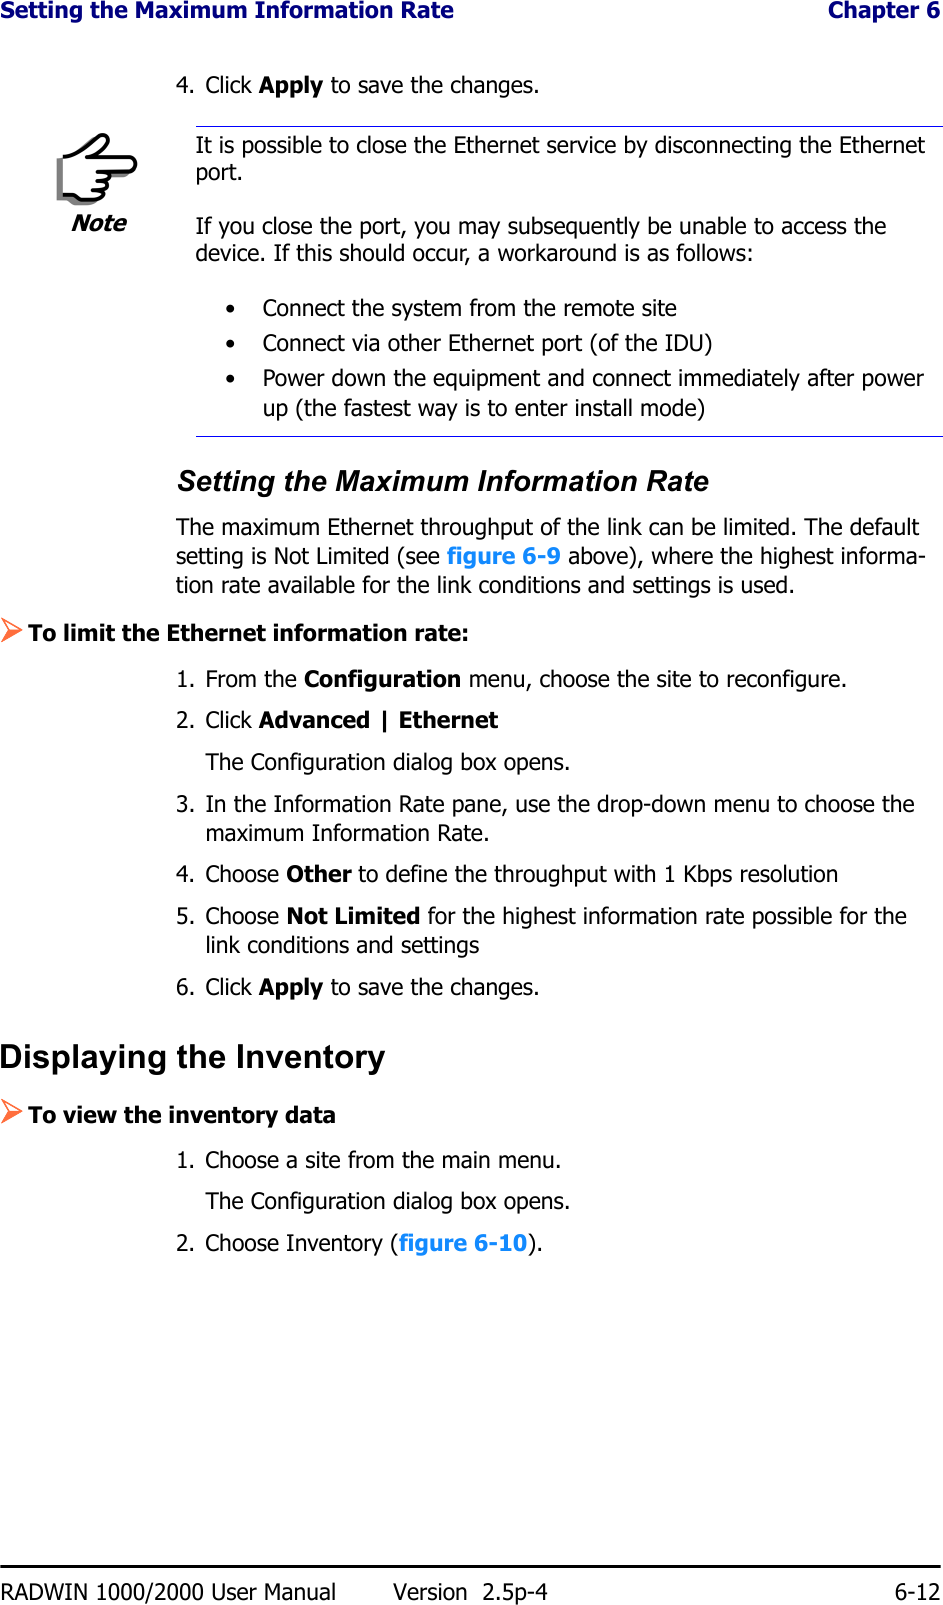 Setting the Maximum Information Rate  Chapter 6RADWIN 1000/2000 User Manual Version  2.5p-4 6-124. Click Apply to save the changes.Setting the Maximum Information RateThe maximum Ethernet throughput of the link can be limited. The default setting is Not Limited (see figure 6-9 above), where the highest informa-tion rate available for the link conditions and settings is used.¾To limit the Ethernet information rate:1. From the Configuration menu, choose the site to reconfigure.2. Click Advanced | EthernetThe Configuration dialog box opens.3. In the Information Rate pane, use the drop-down menu to choose the maximum Information Rate.4. Choose Other to define the throughput with 1 Kbps resolution5. Choose Not Limited for the highest information rate possible for the link conditions and settings6. Click Apply to save the changes.Displaying the Inventory¾To view the inventory data1. Choose a site from the main menu.The Configuration dialog box opens.2. Choose Inventory (figure 6-10).NoteIt is possible to close the Ethernet service by disconnecting the Ethernet port.If you close the port, you may subsequently be unable to access the device. If this should occur, a workaround is as follows:• Connect the system from the remote site• Connect via other Ethernet port (of the IDU)• Power down the equipment and connect immediately after power up (the fastest way is to enter install mode)